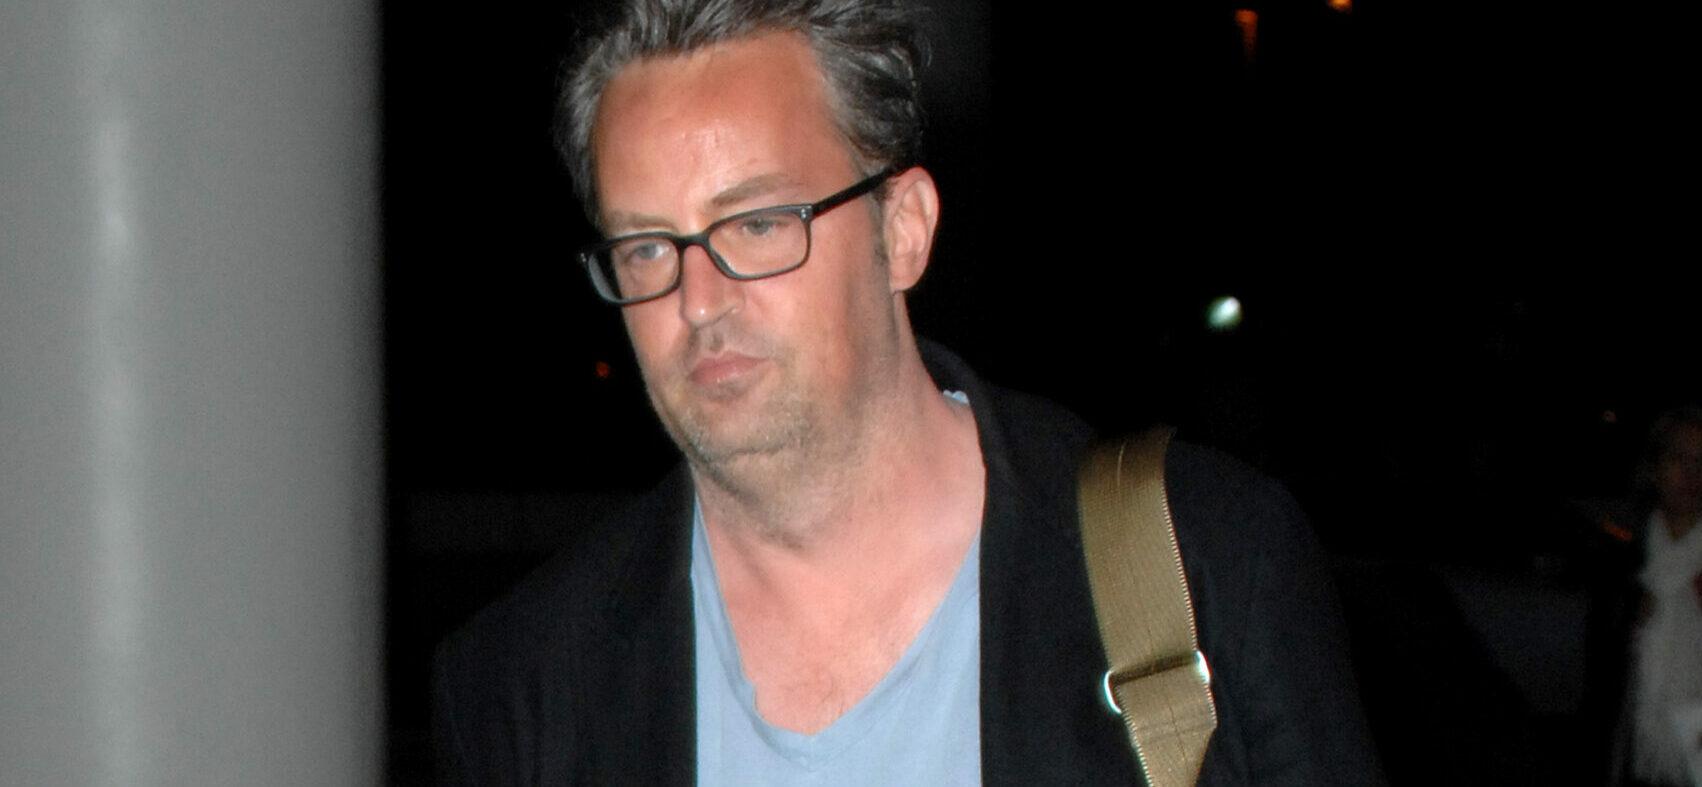 Matthew Perry shows off a fuller figure and double chin as he arrives at LAX airport